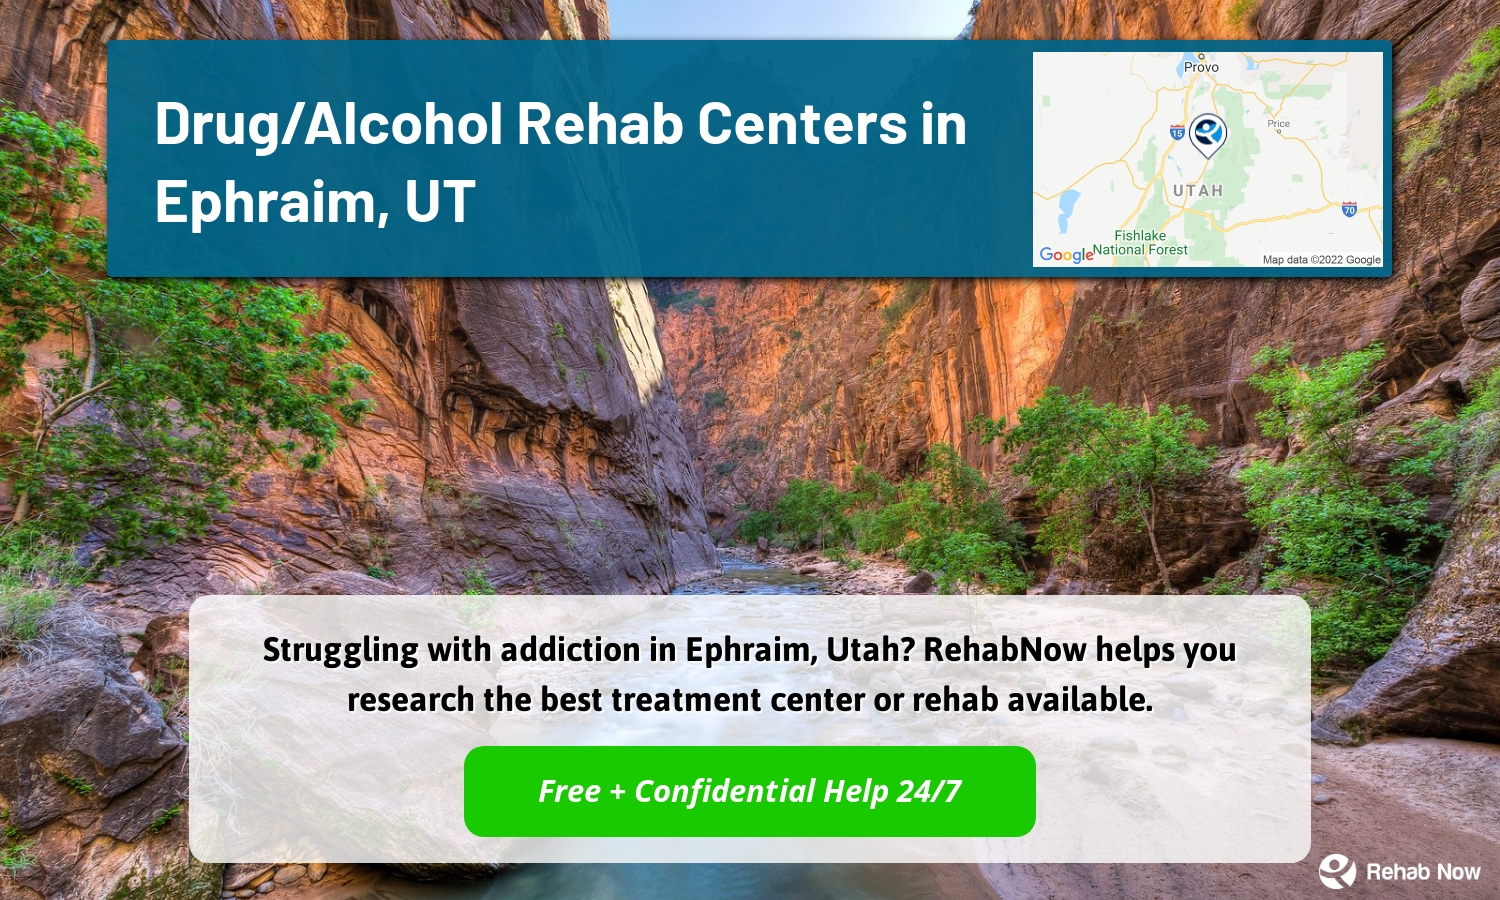 Struggling with addiction in Ephraim, Utah? RehabNow helps you research the best treatment center or rehab available.